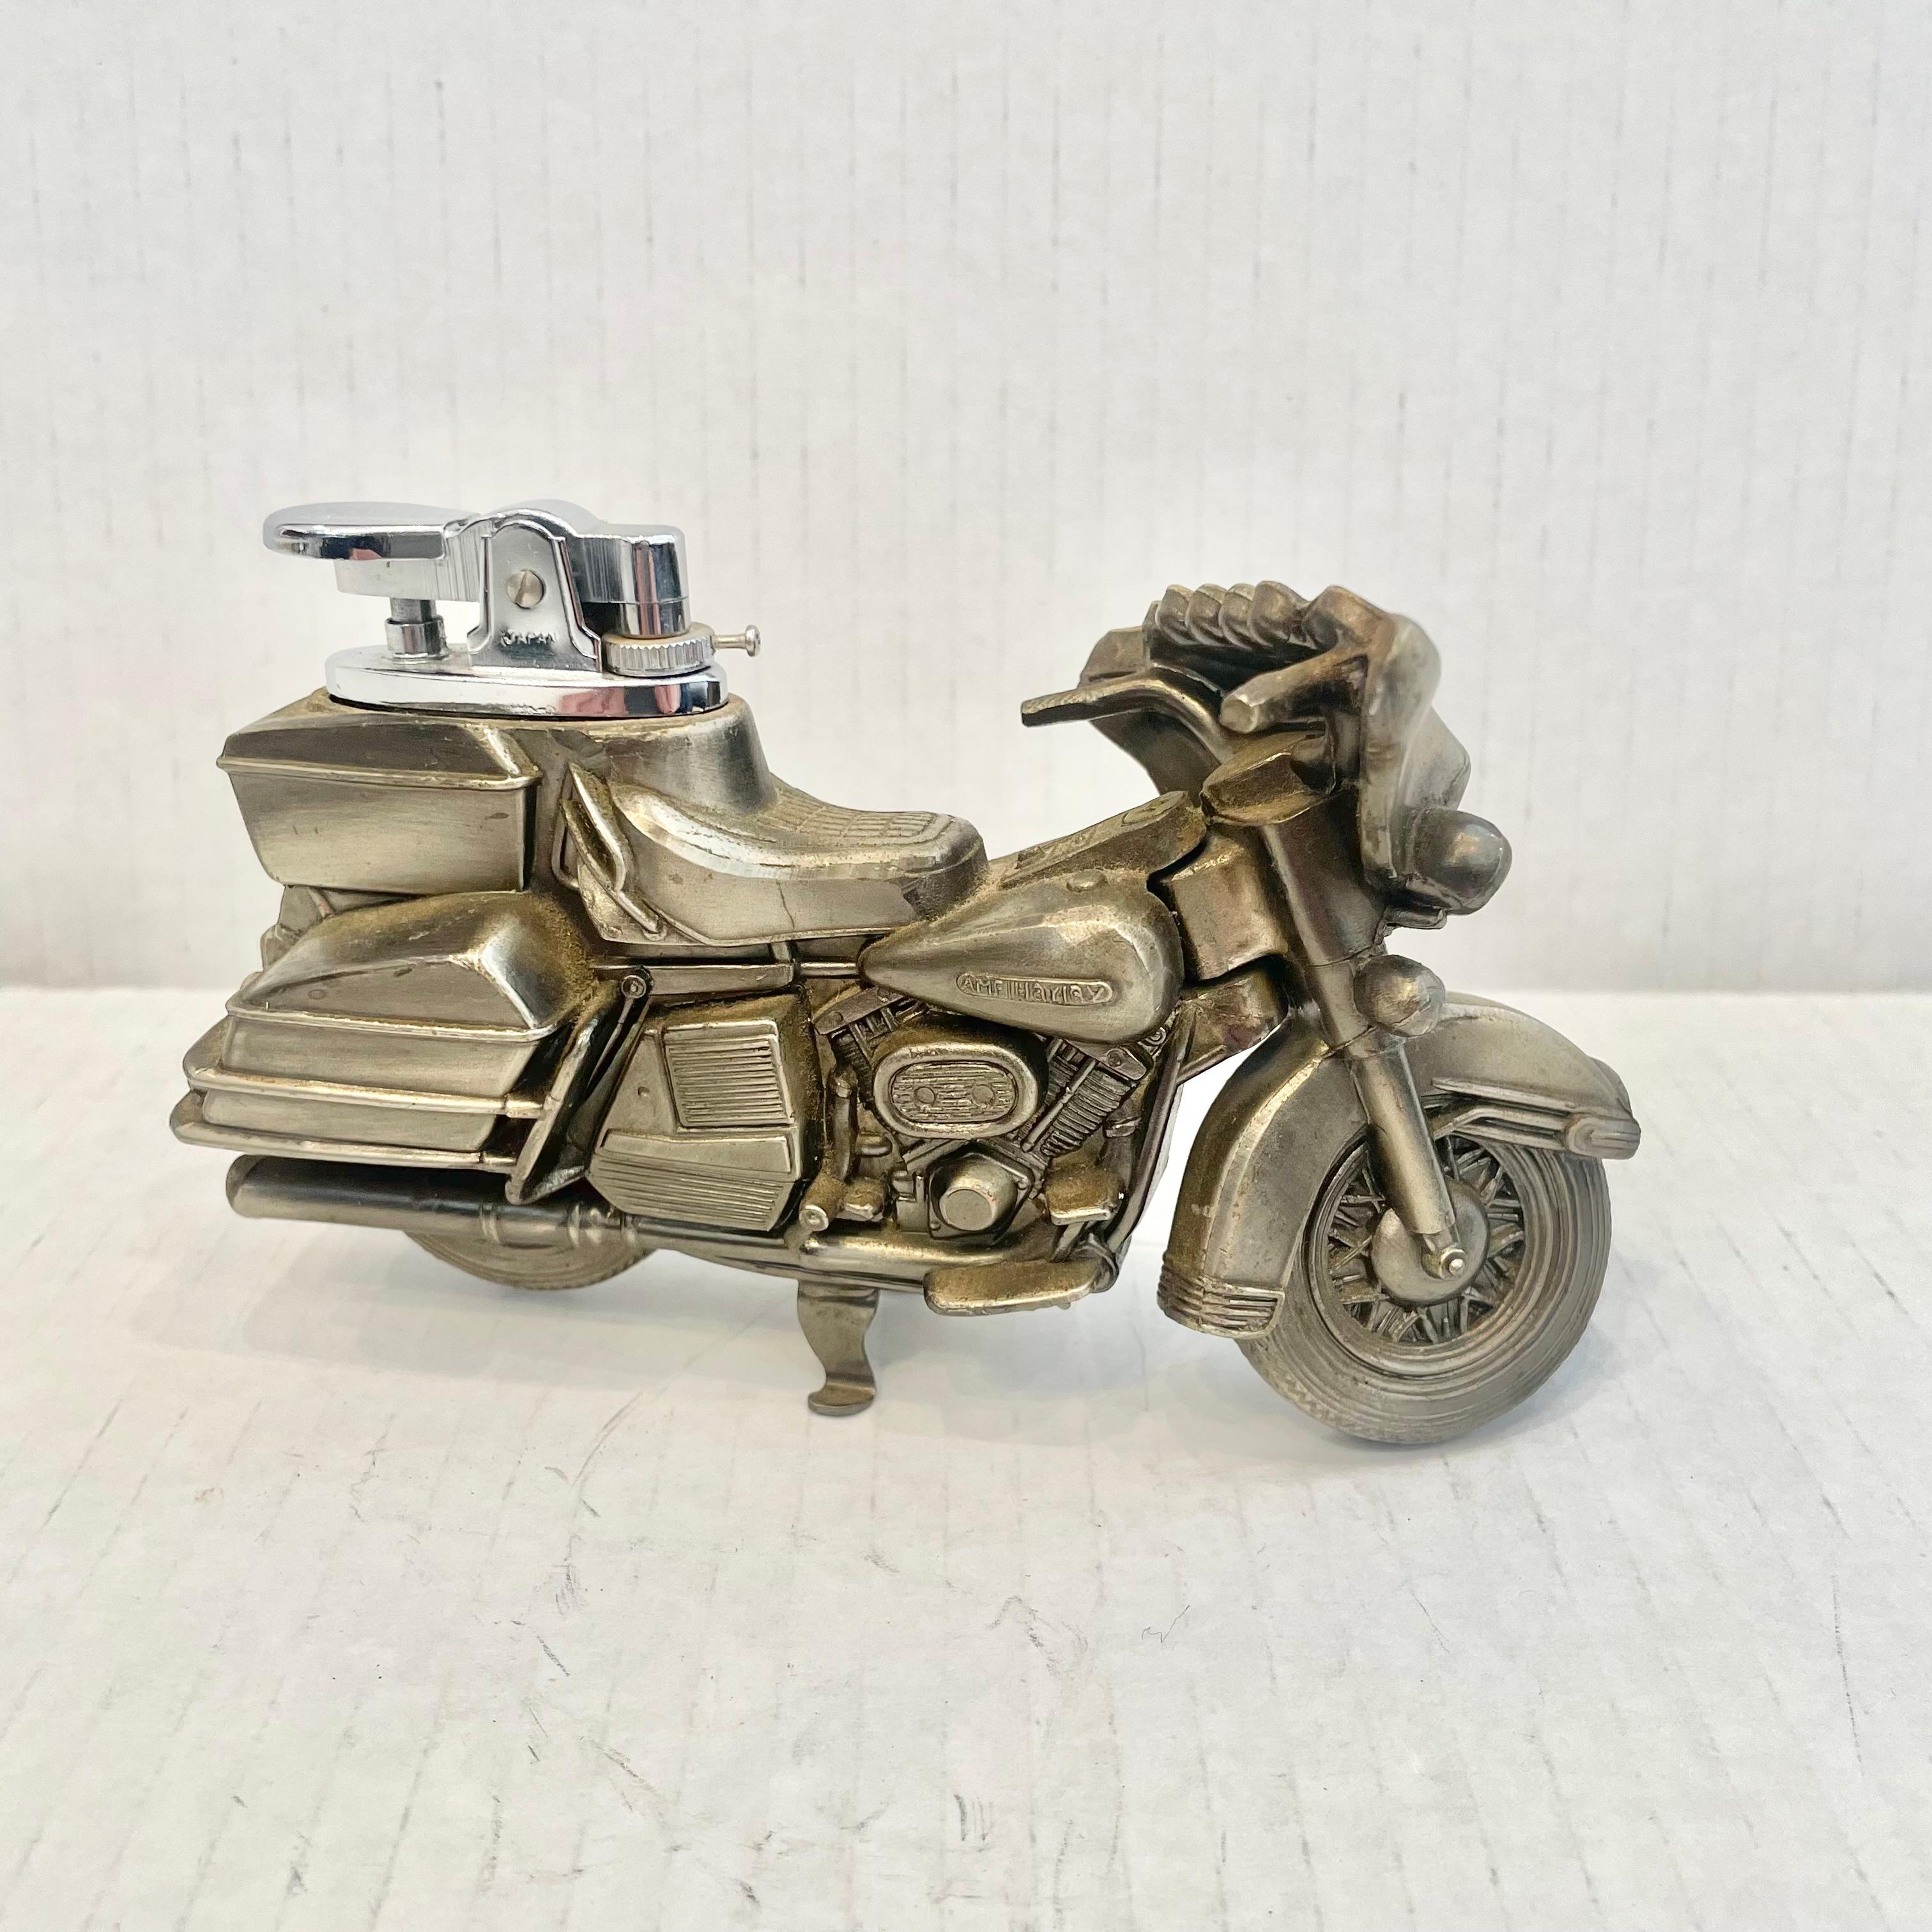 Great vintage table lighter in the shape of a AMF Harley Davidson motorcycle. In 1969, the AMF corporation (American Machine and Foundry) took over production of Harley-Davidson motorcycles. Made completely of metal with a hollow body. Great dark